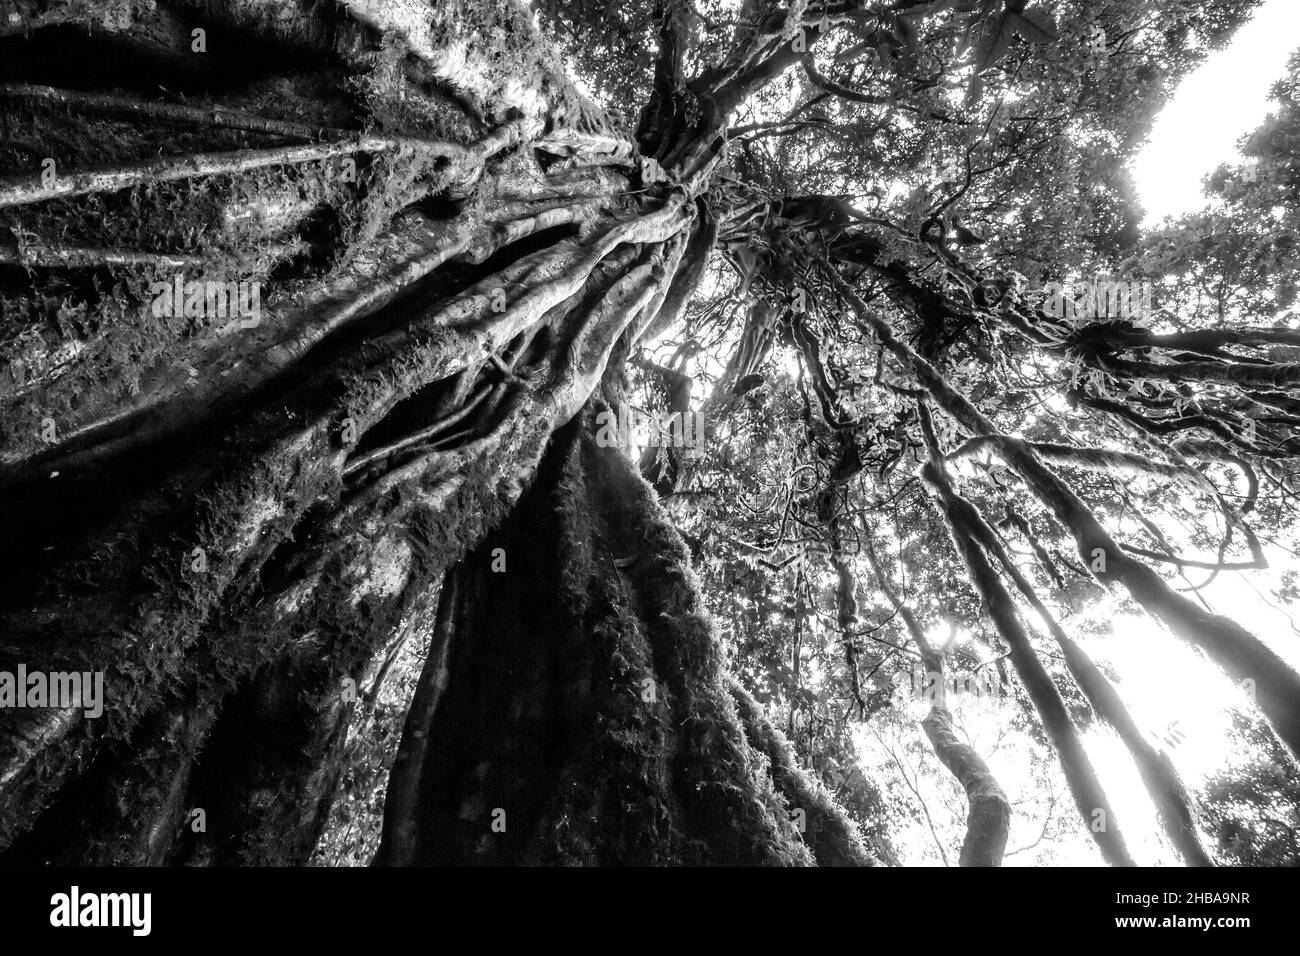 A large, majestic, Forest Strangler Fig, Ficus craterostoma, in Black and White, in the subtropical forest of Magoebaskloof, South Africa. This large Stock Photo